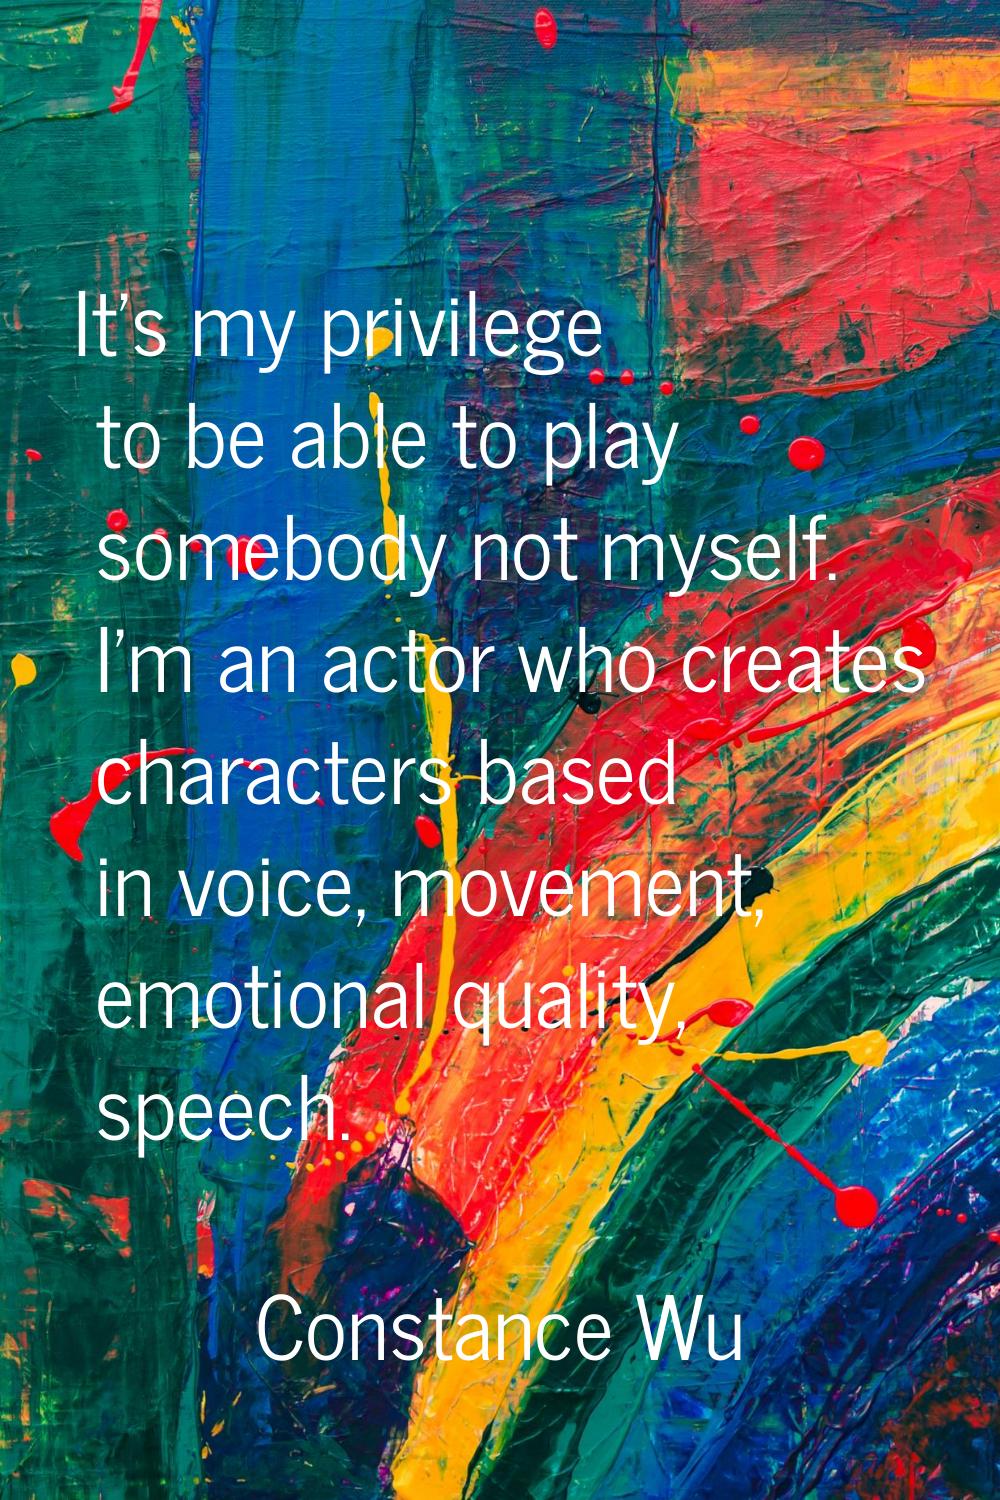 It's my privilege to be able to play somebody not myself. I'm an actor who creates characters based